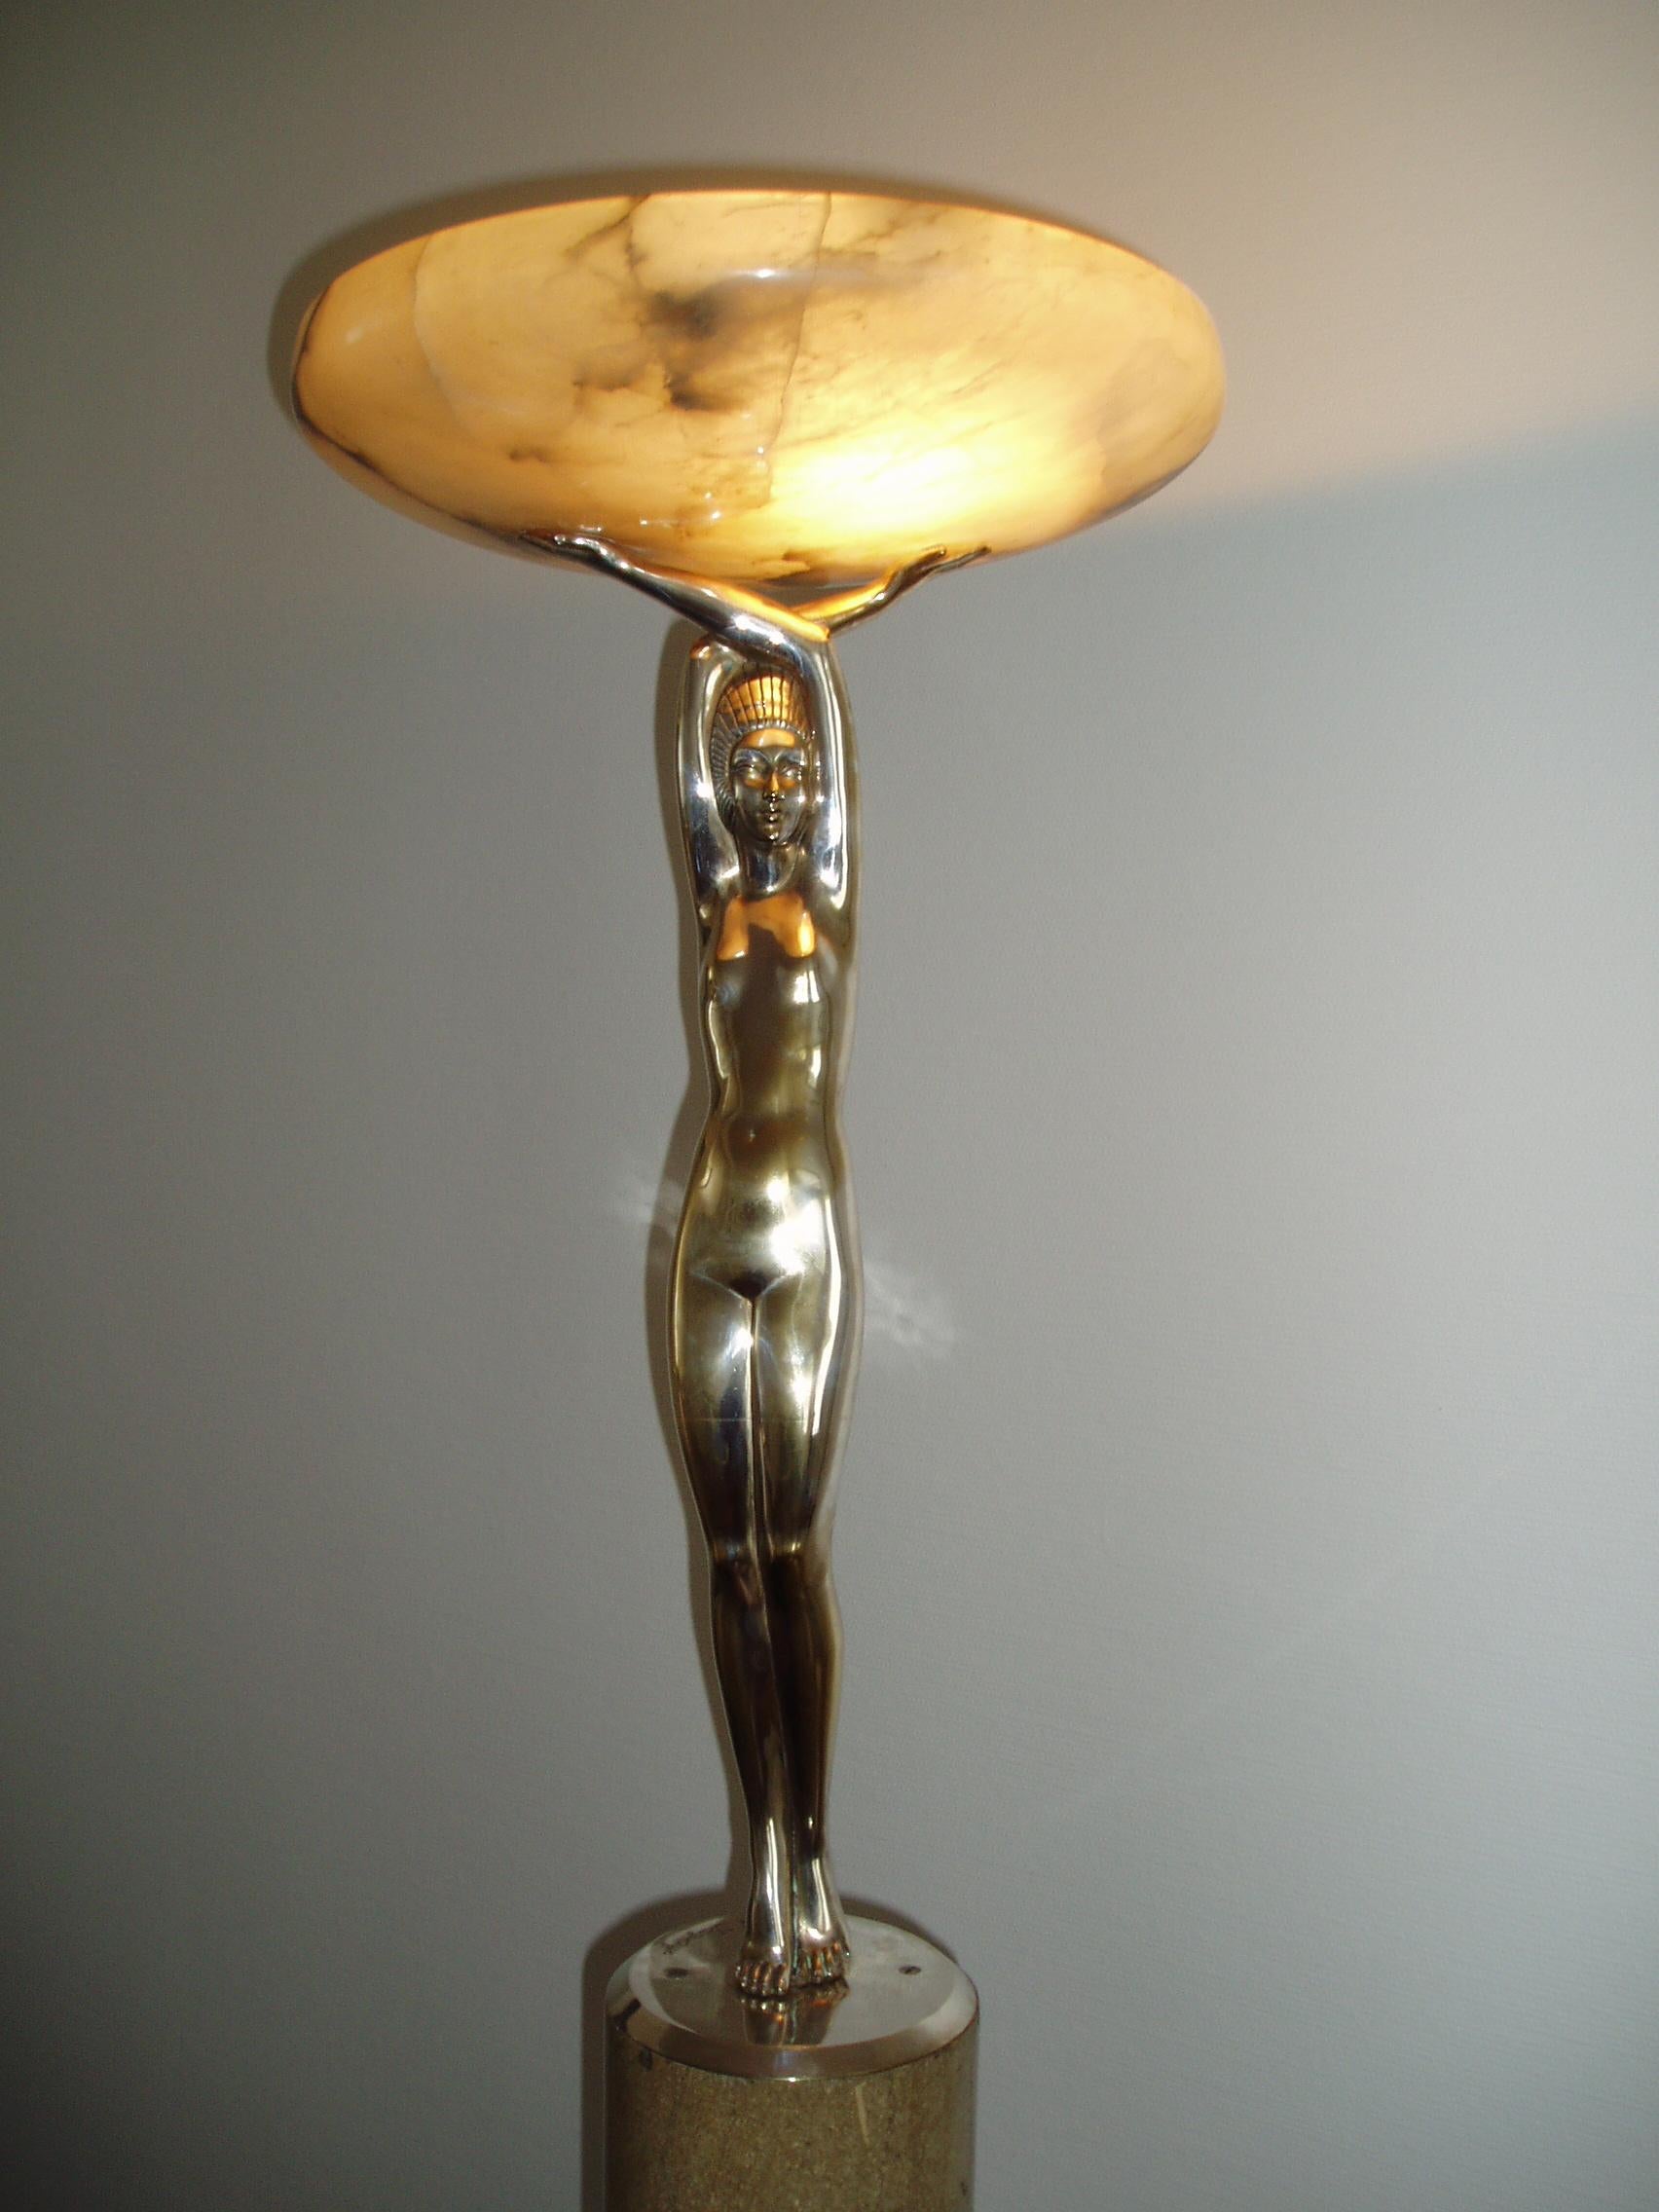 Early 20th Century French Art Déco Sculpture by Pierre le Faguays on high Stone Base. Illuminated. For Sale